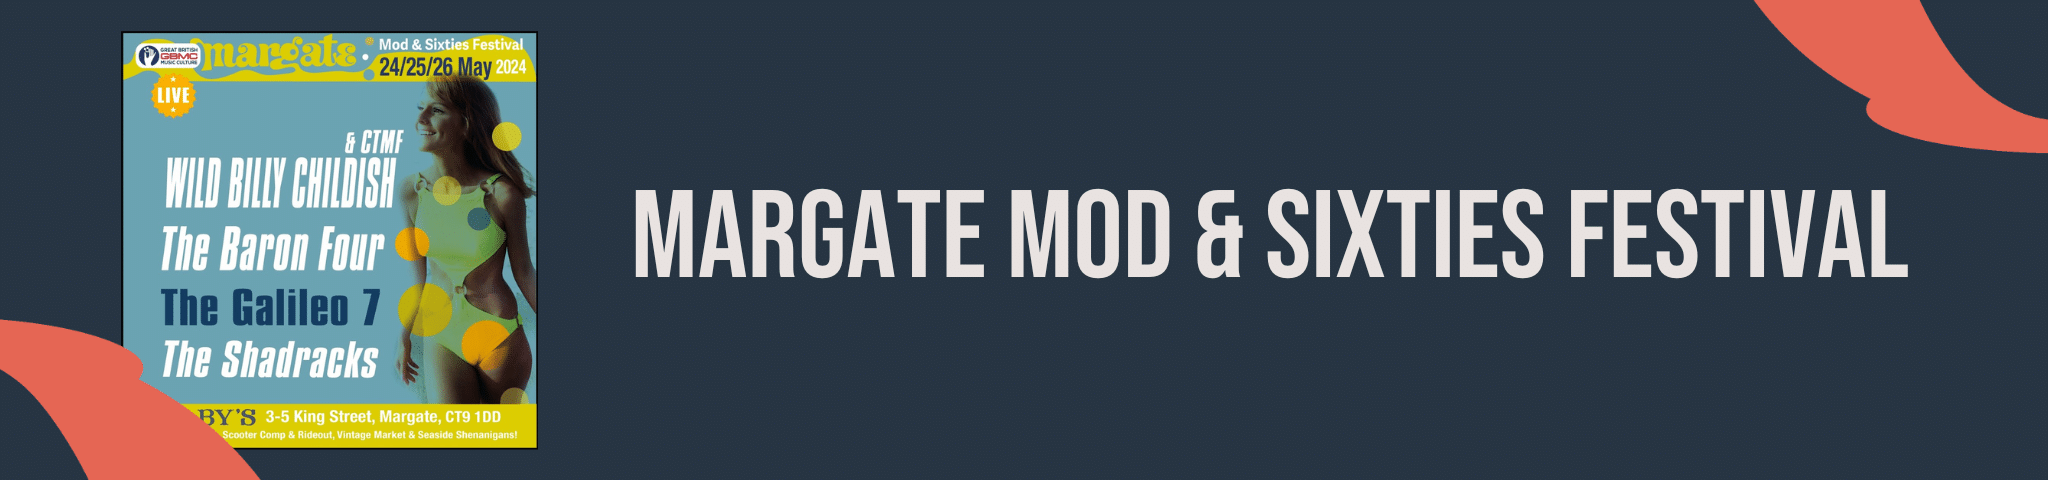 MARGATE MOD & SIXTIES FESTIVAL – 24TH-26TH MAY 2024